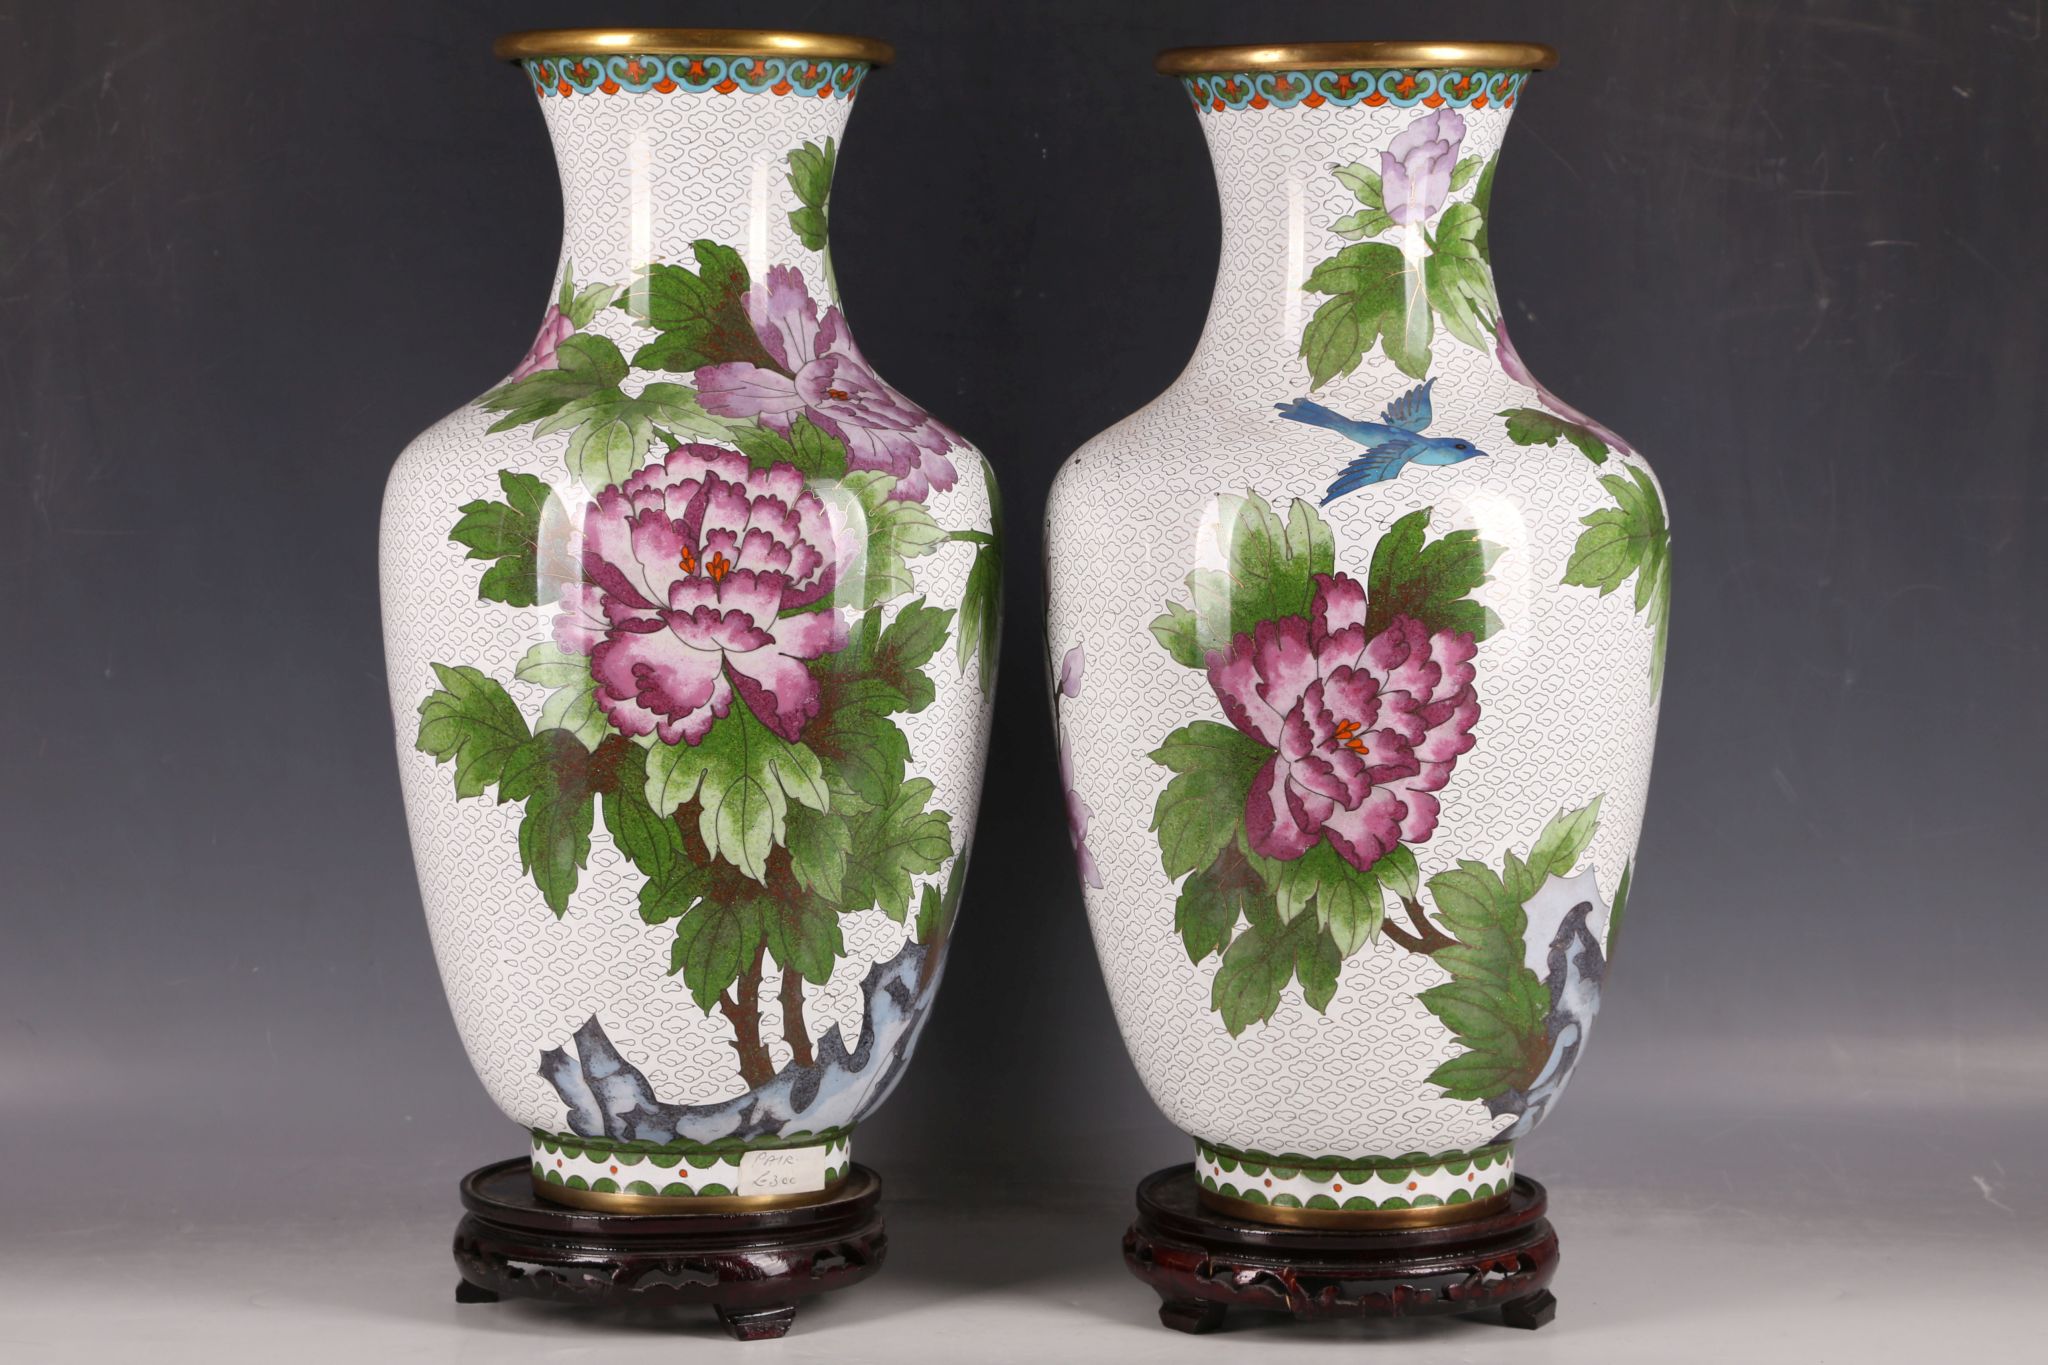 A pair of large cloisonné vases, with birds among flower blossoms on white ground, on wooden stand.